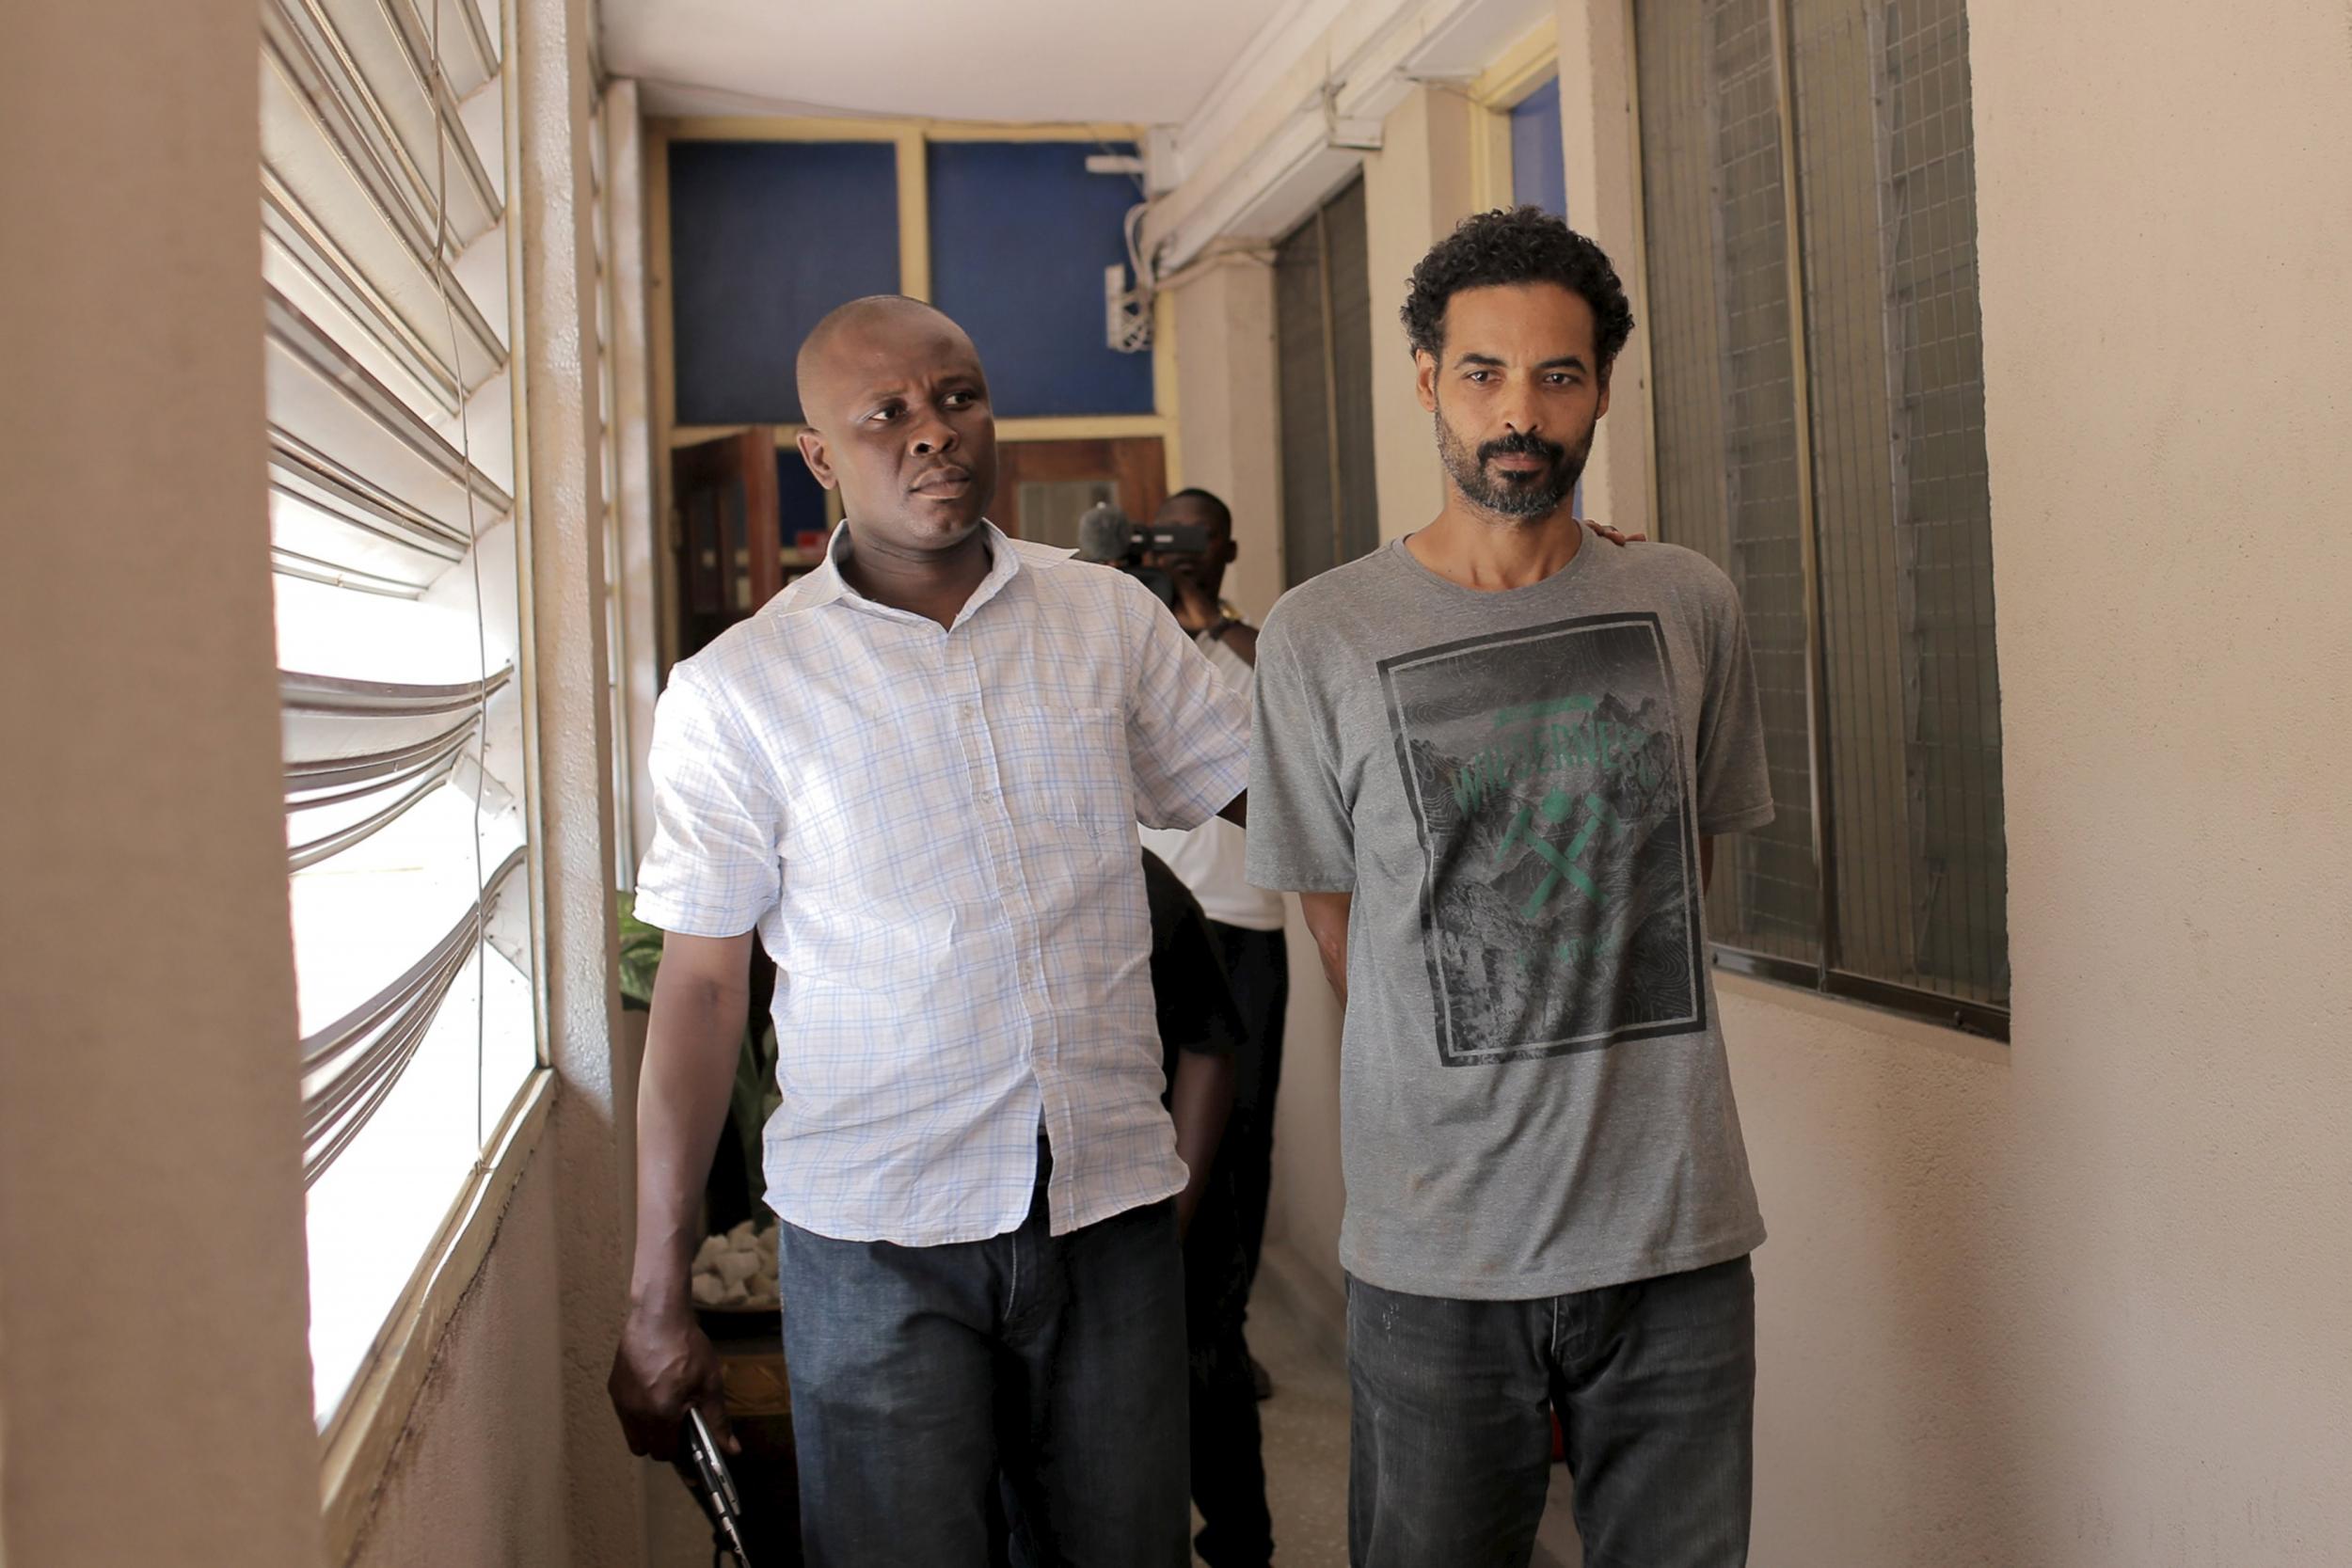 A Ghanaian police officer escorts Arthur Simpson-Kent inside the Criminal Investigation Department headquarters in Accra, Ghana